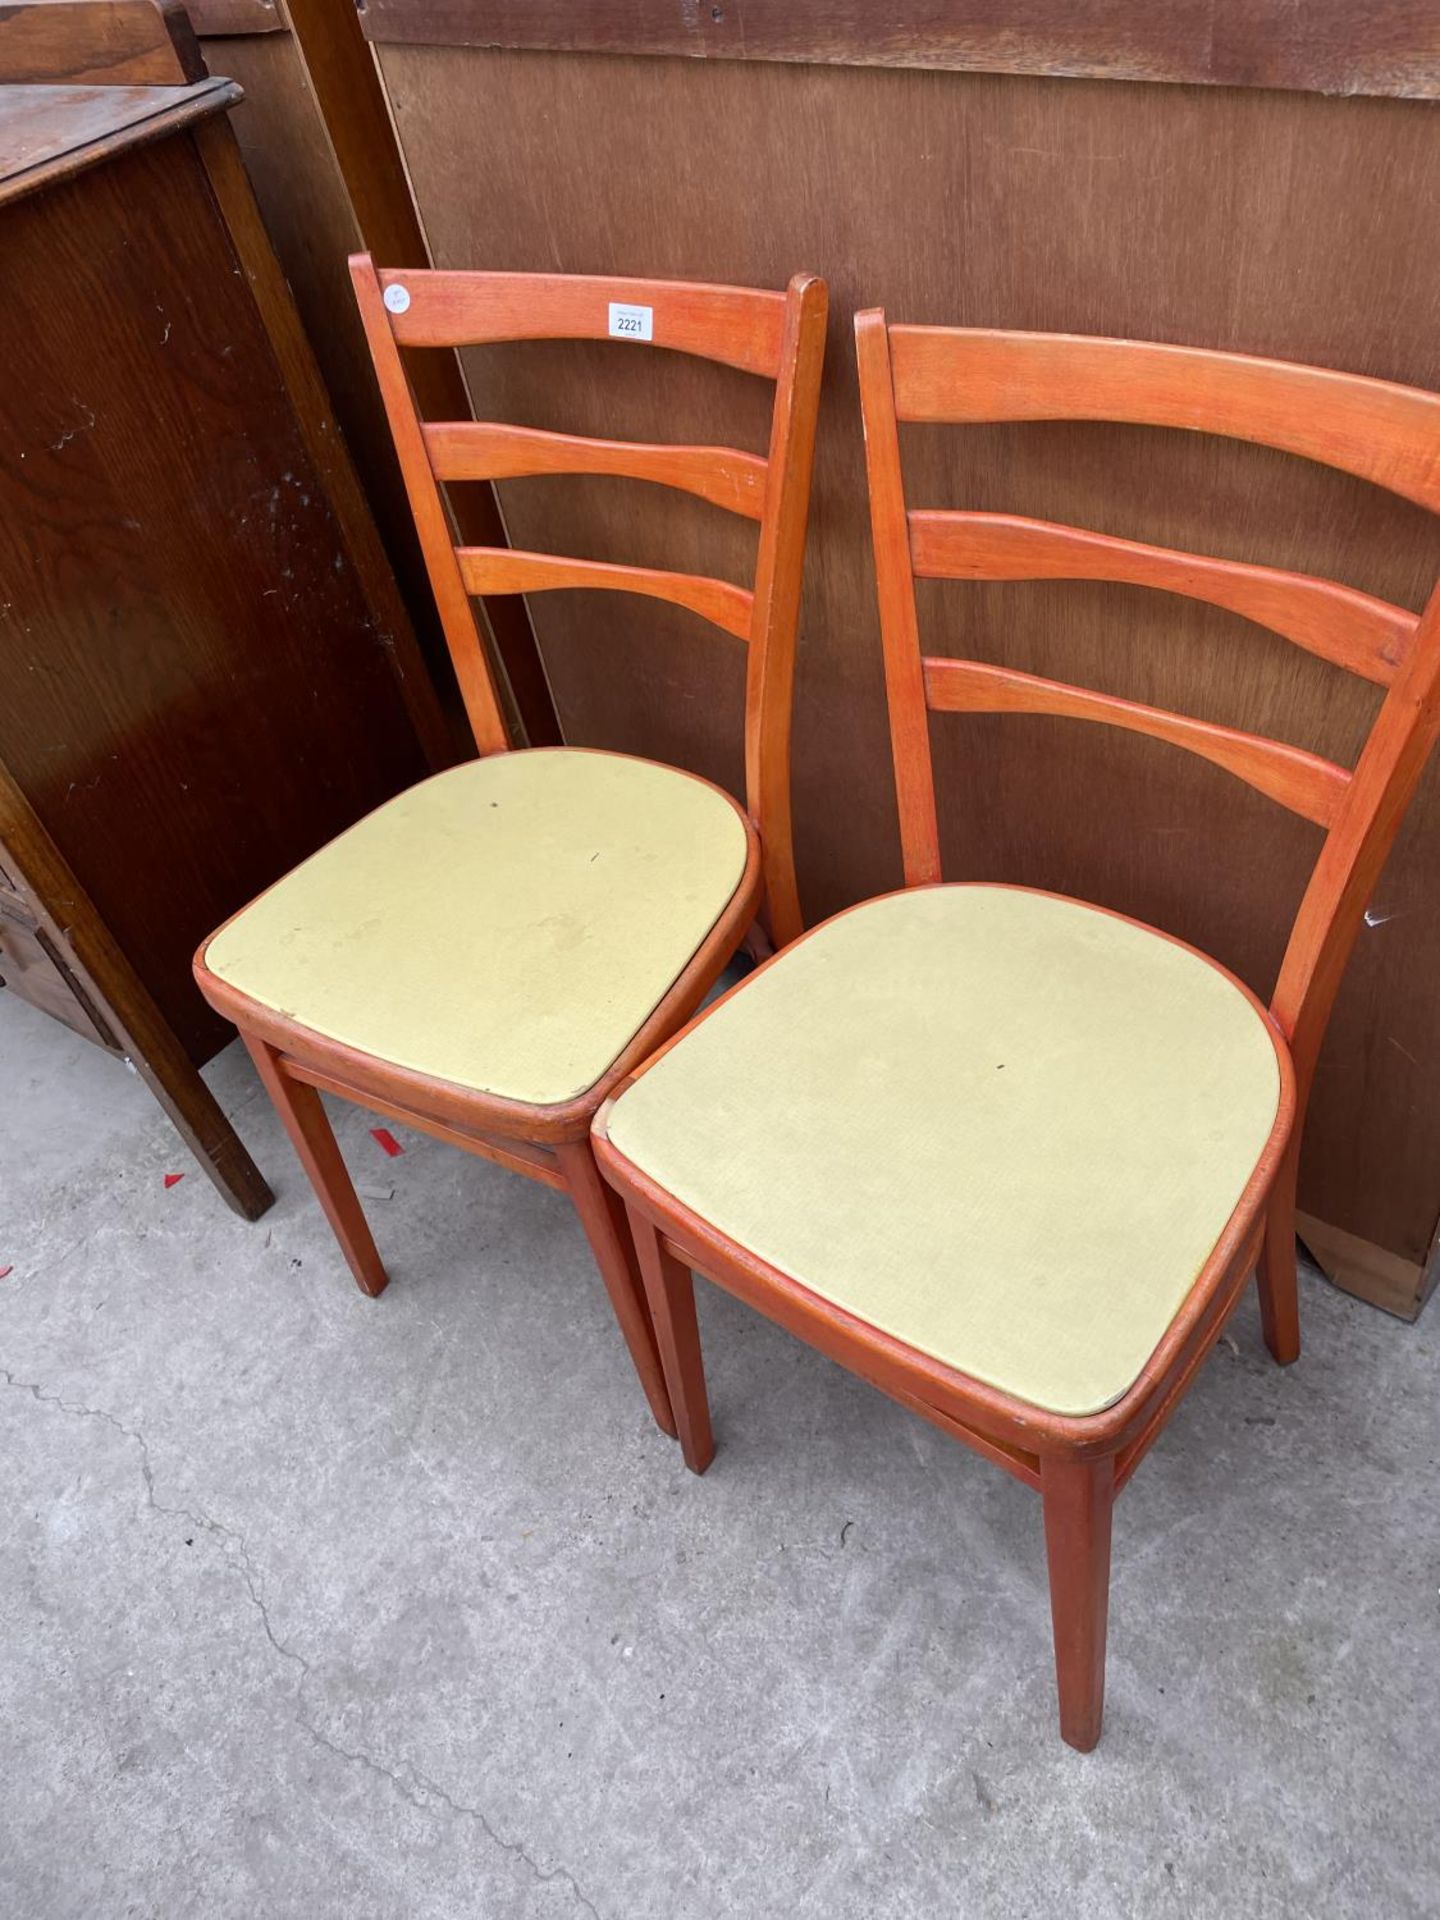 A PAIR OF 20TH CENTURY KITCHEN CHAIRS AND A FOLDING CARD TABLE - Image 2 of 3